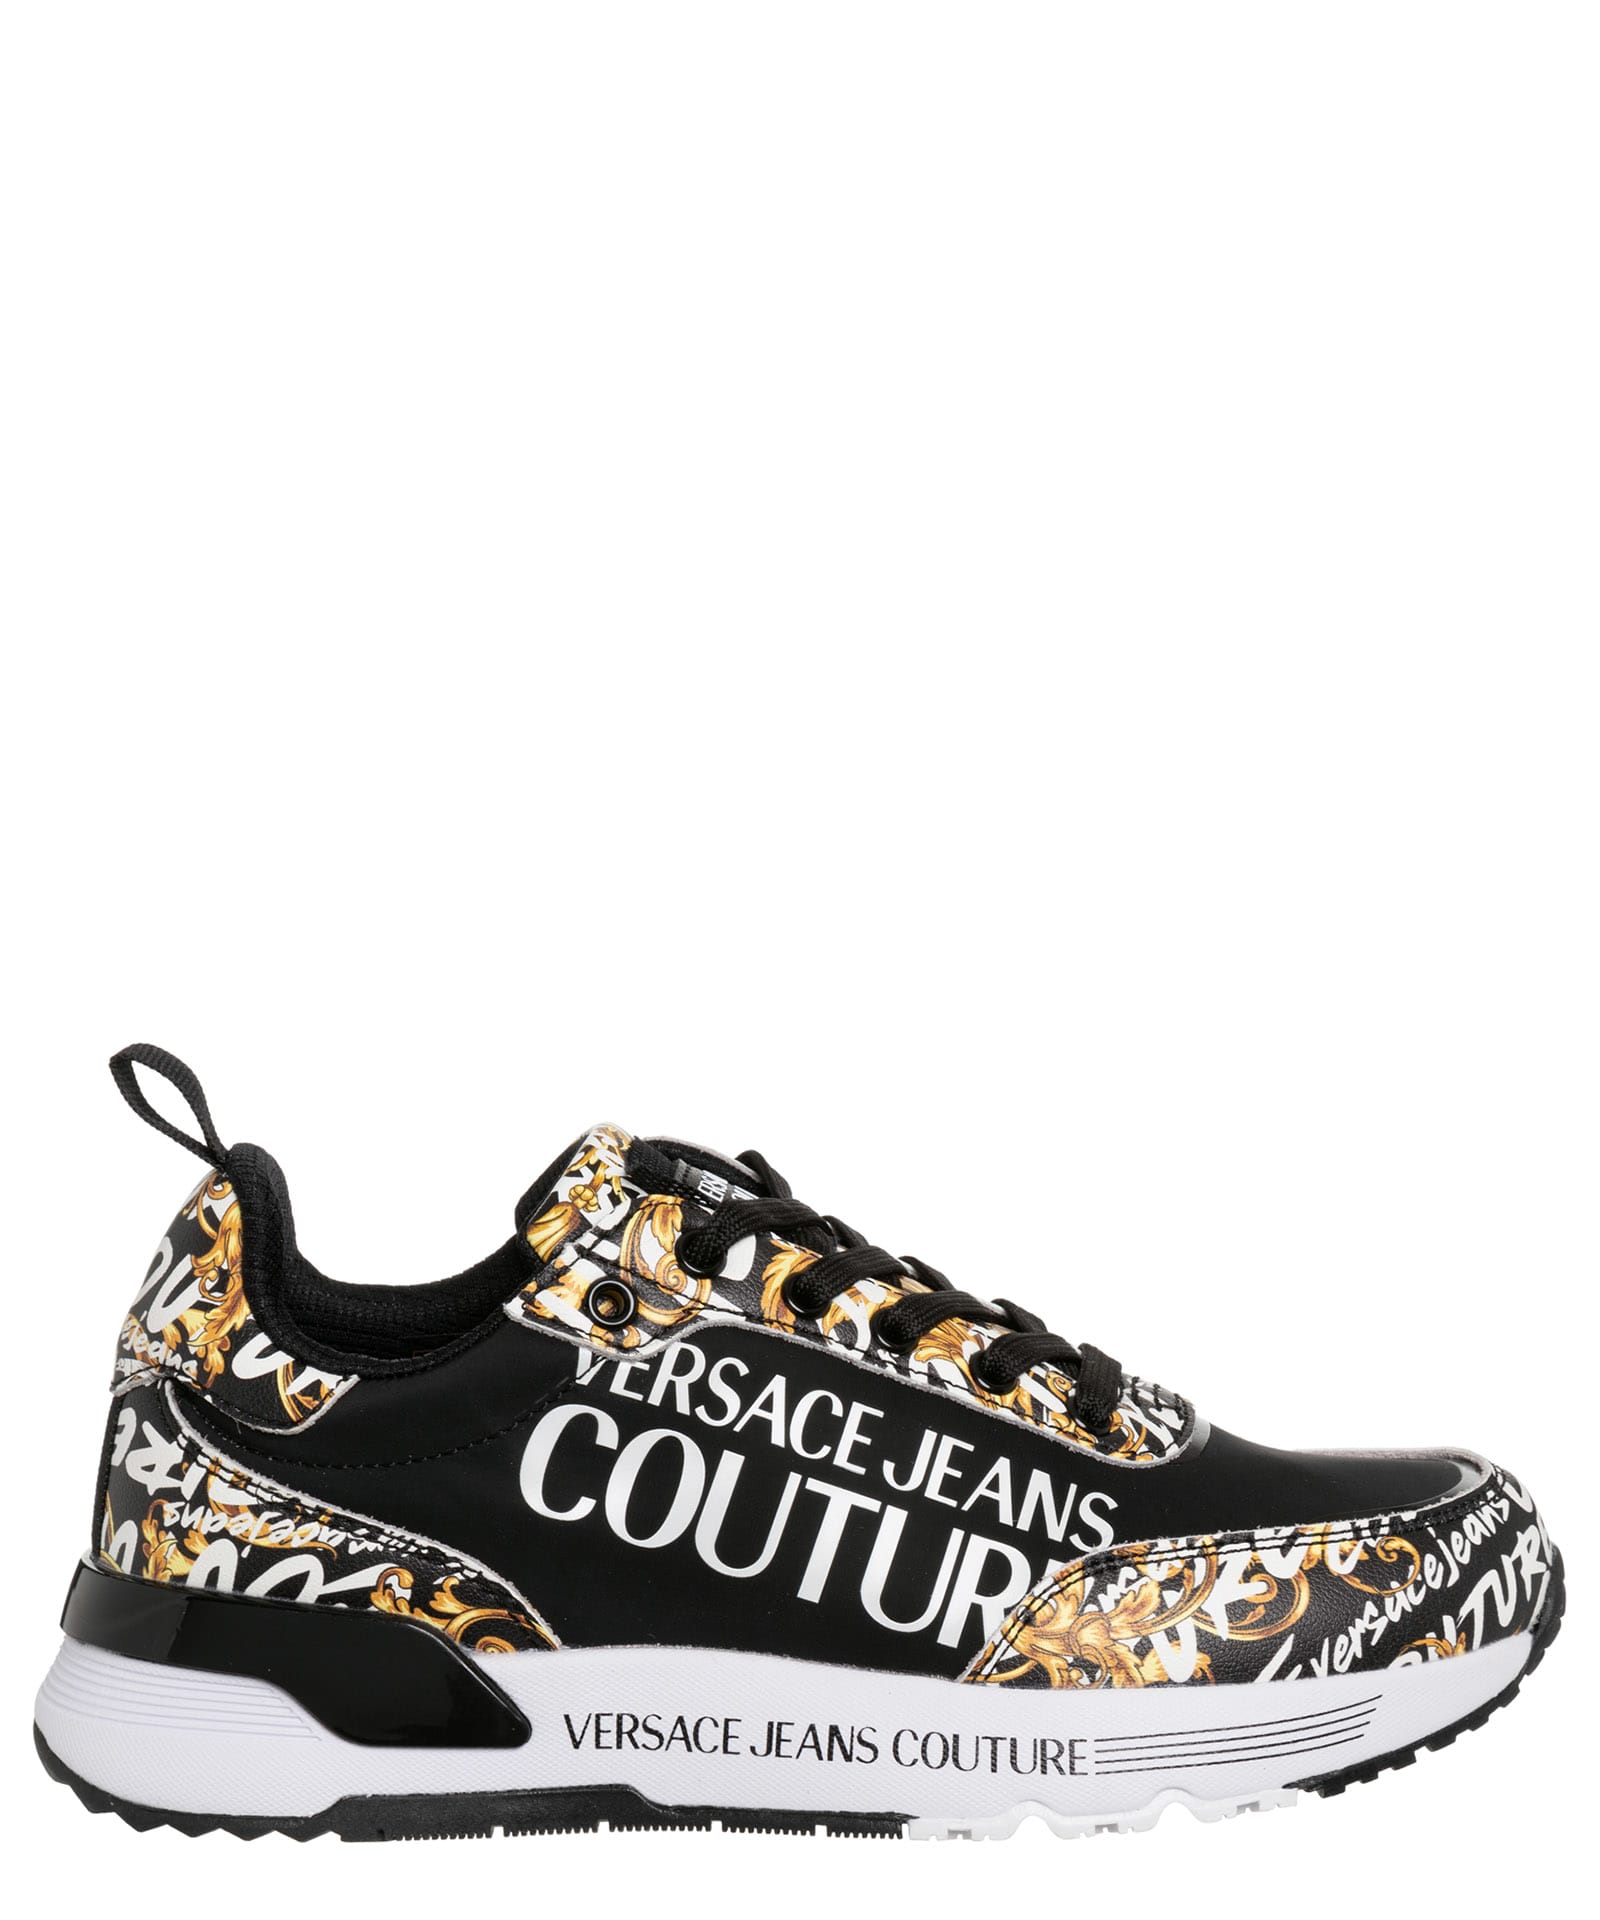 VERSACE JEANS COUTURE DYNAMIC LOGO BRUSH COUTURE LEATHER trainers